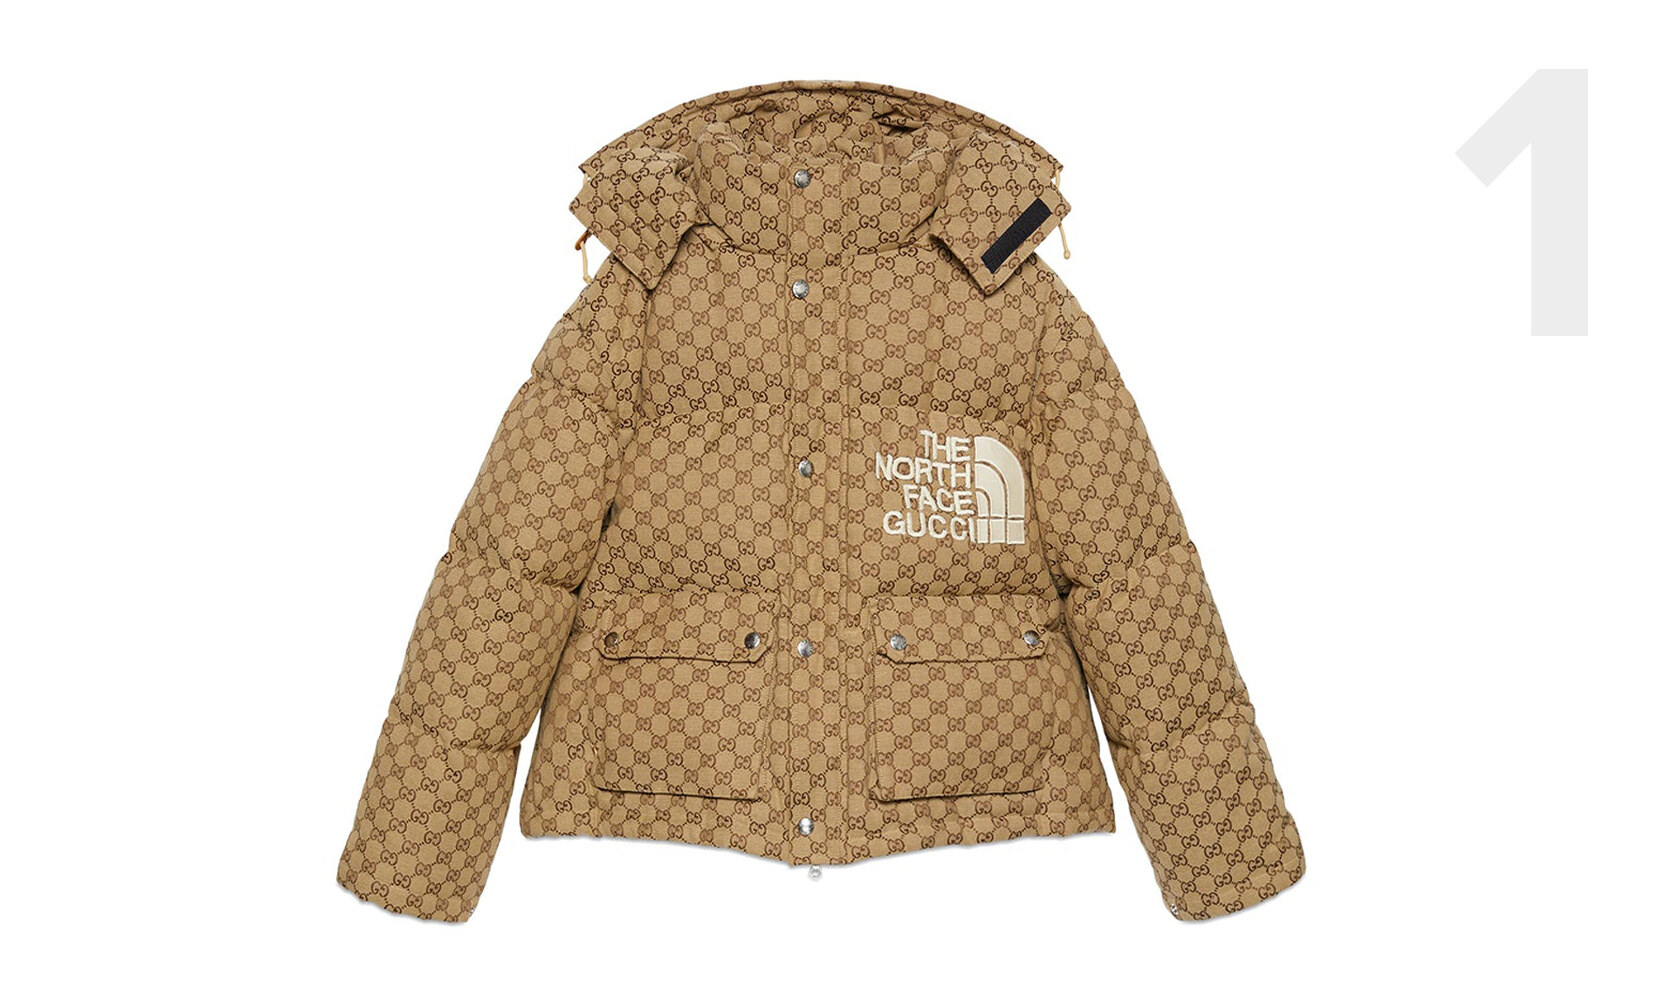 Gucci x The North Face Down Jacket